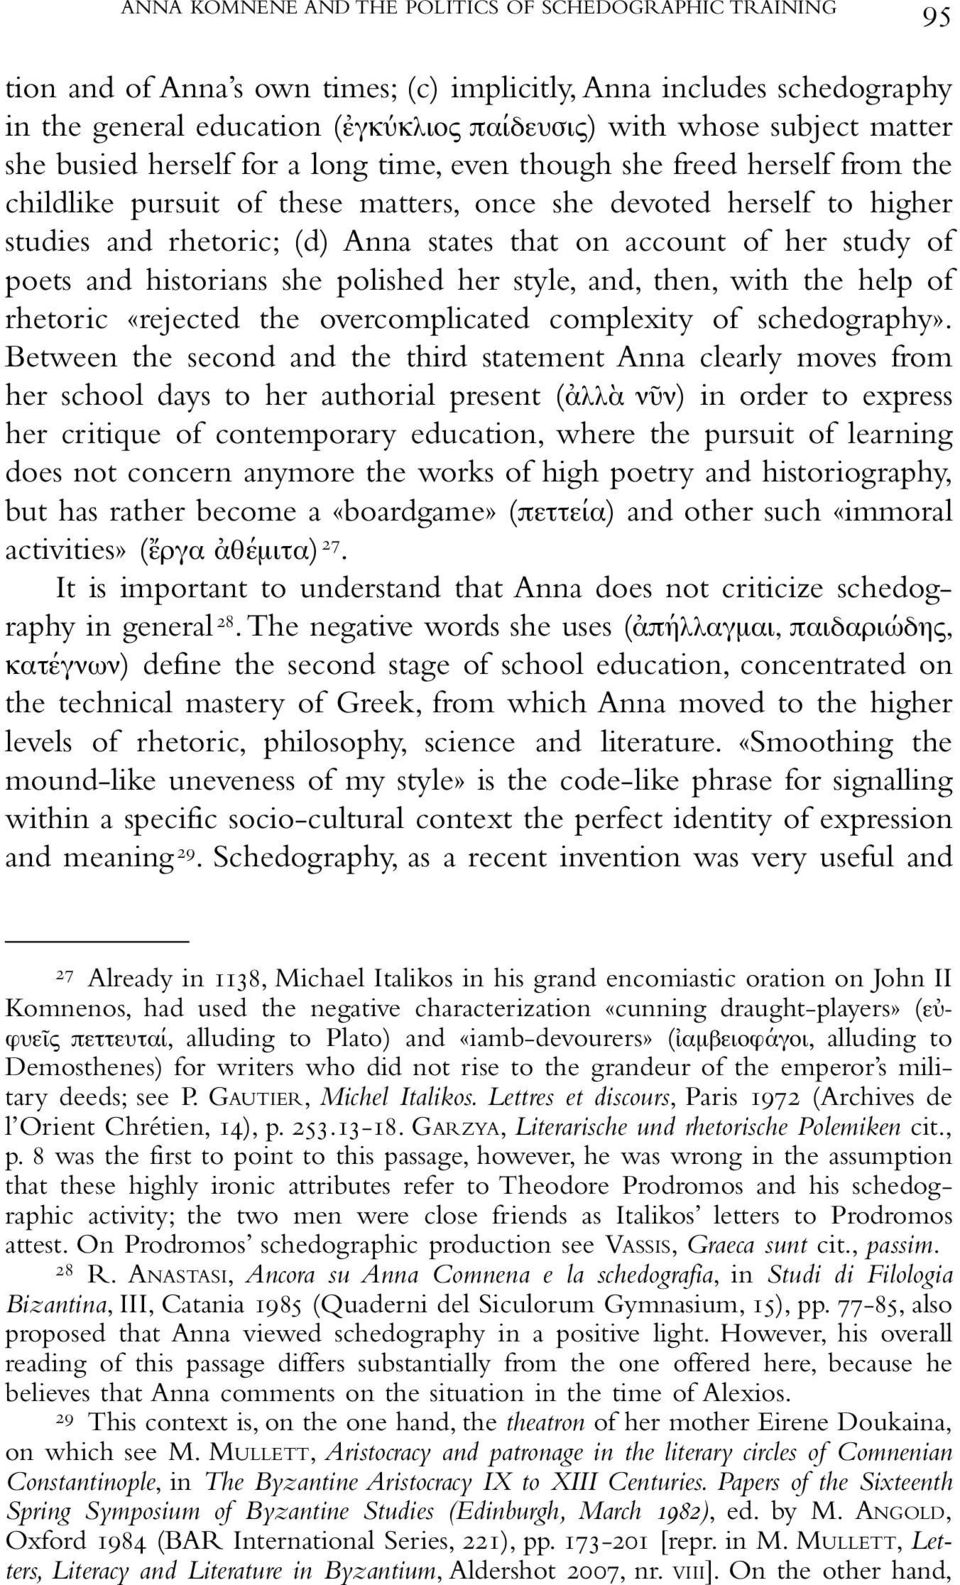 account of her study of poets and historians she polished her style, and, then, with the help of rhetoric «rejected the overcomplicated complexity of schedography».